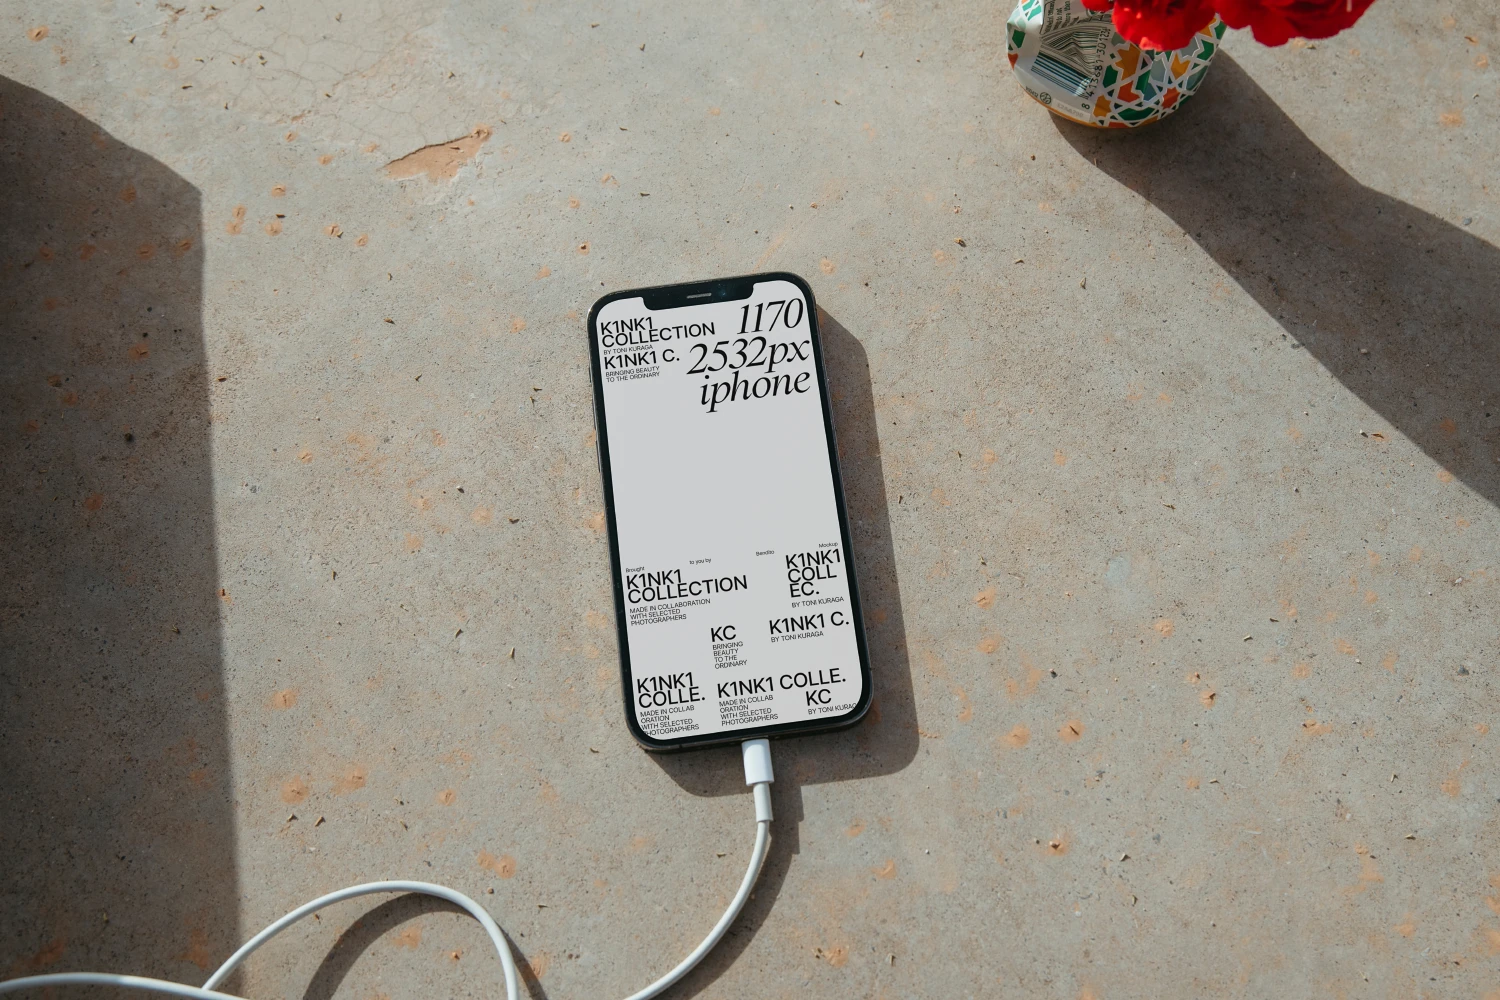 iPhone mockup placed on a urban floor. It is surrounded by its charge wire and flowers.